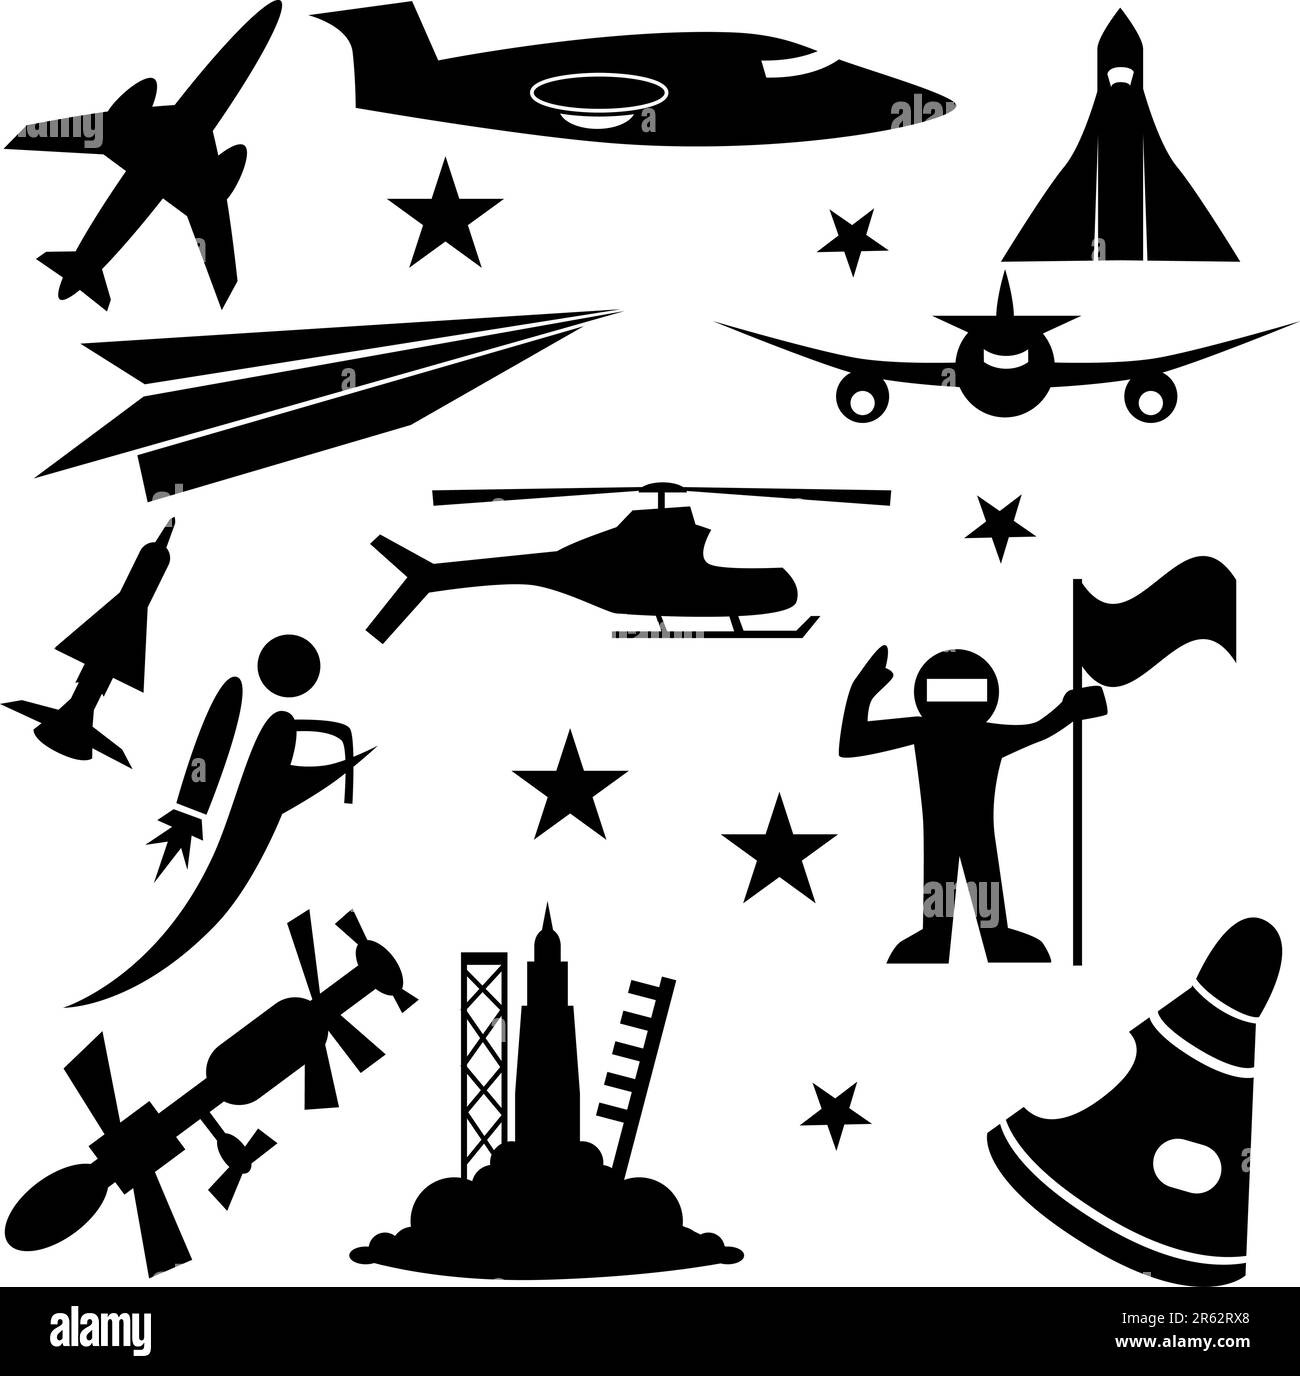 Aerospace icon set isolated on a white background. Stock Vector